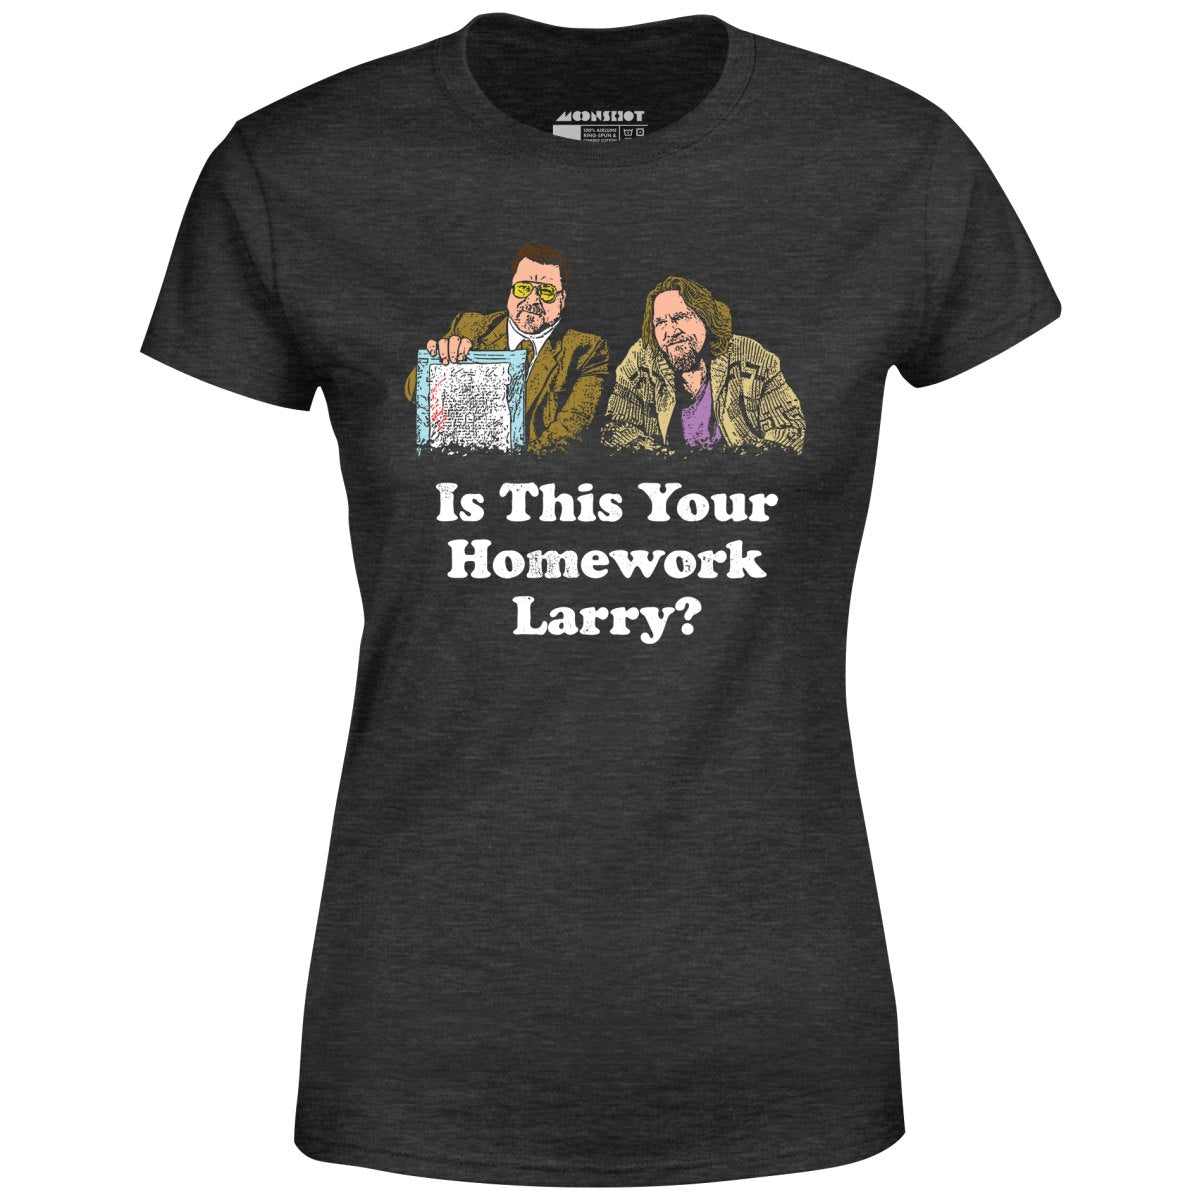 Is This Your Homework, Larry? - Women's T-Shirt